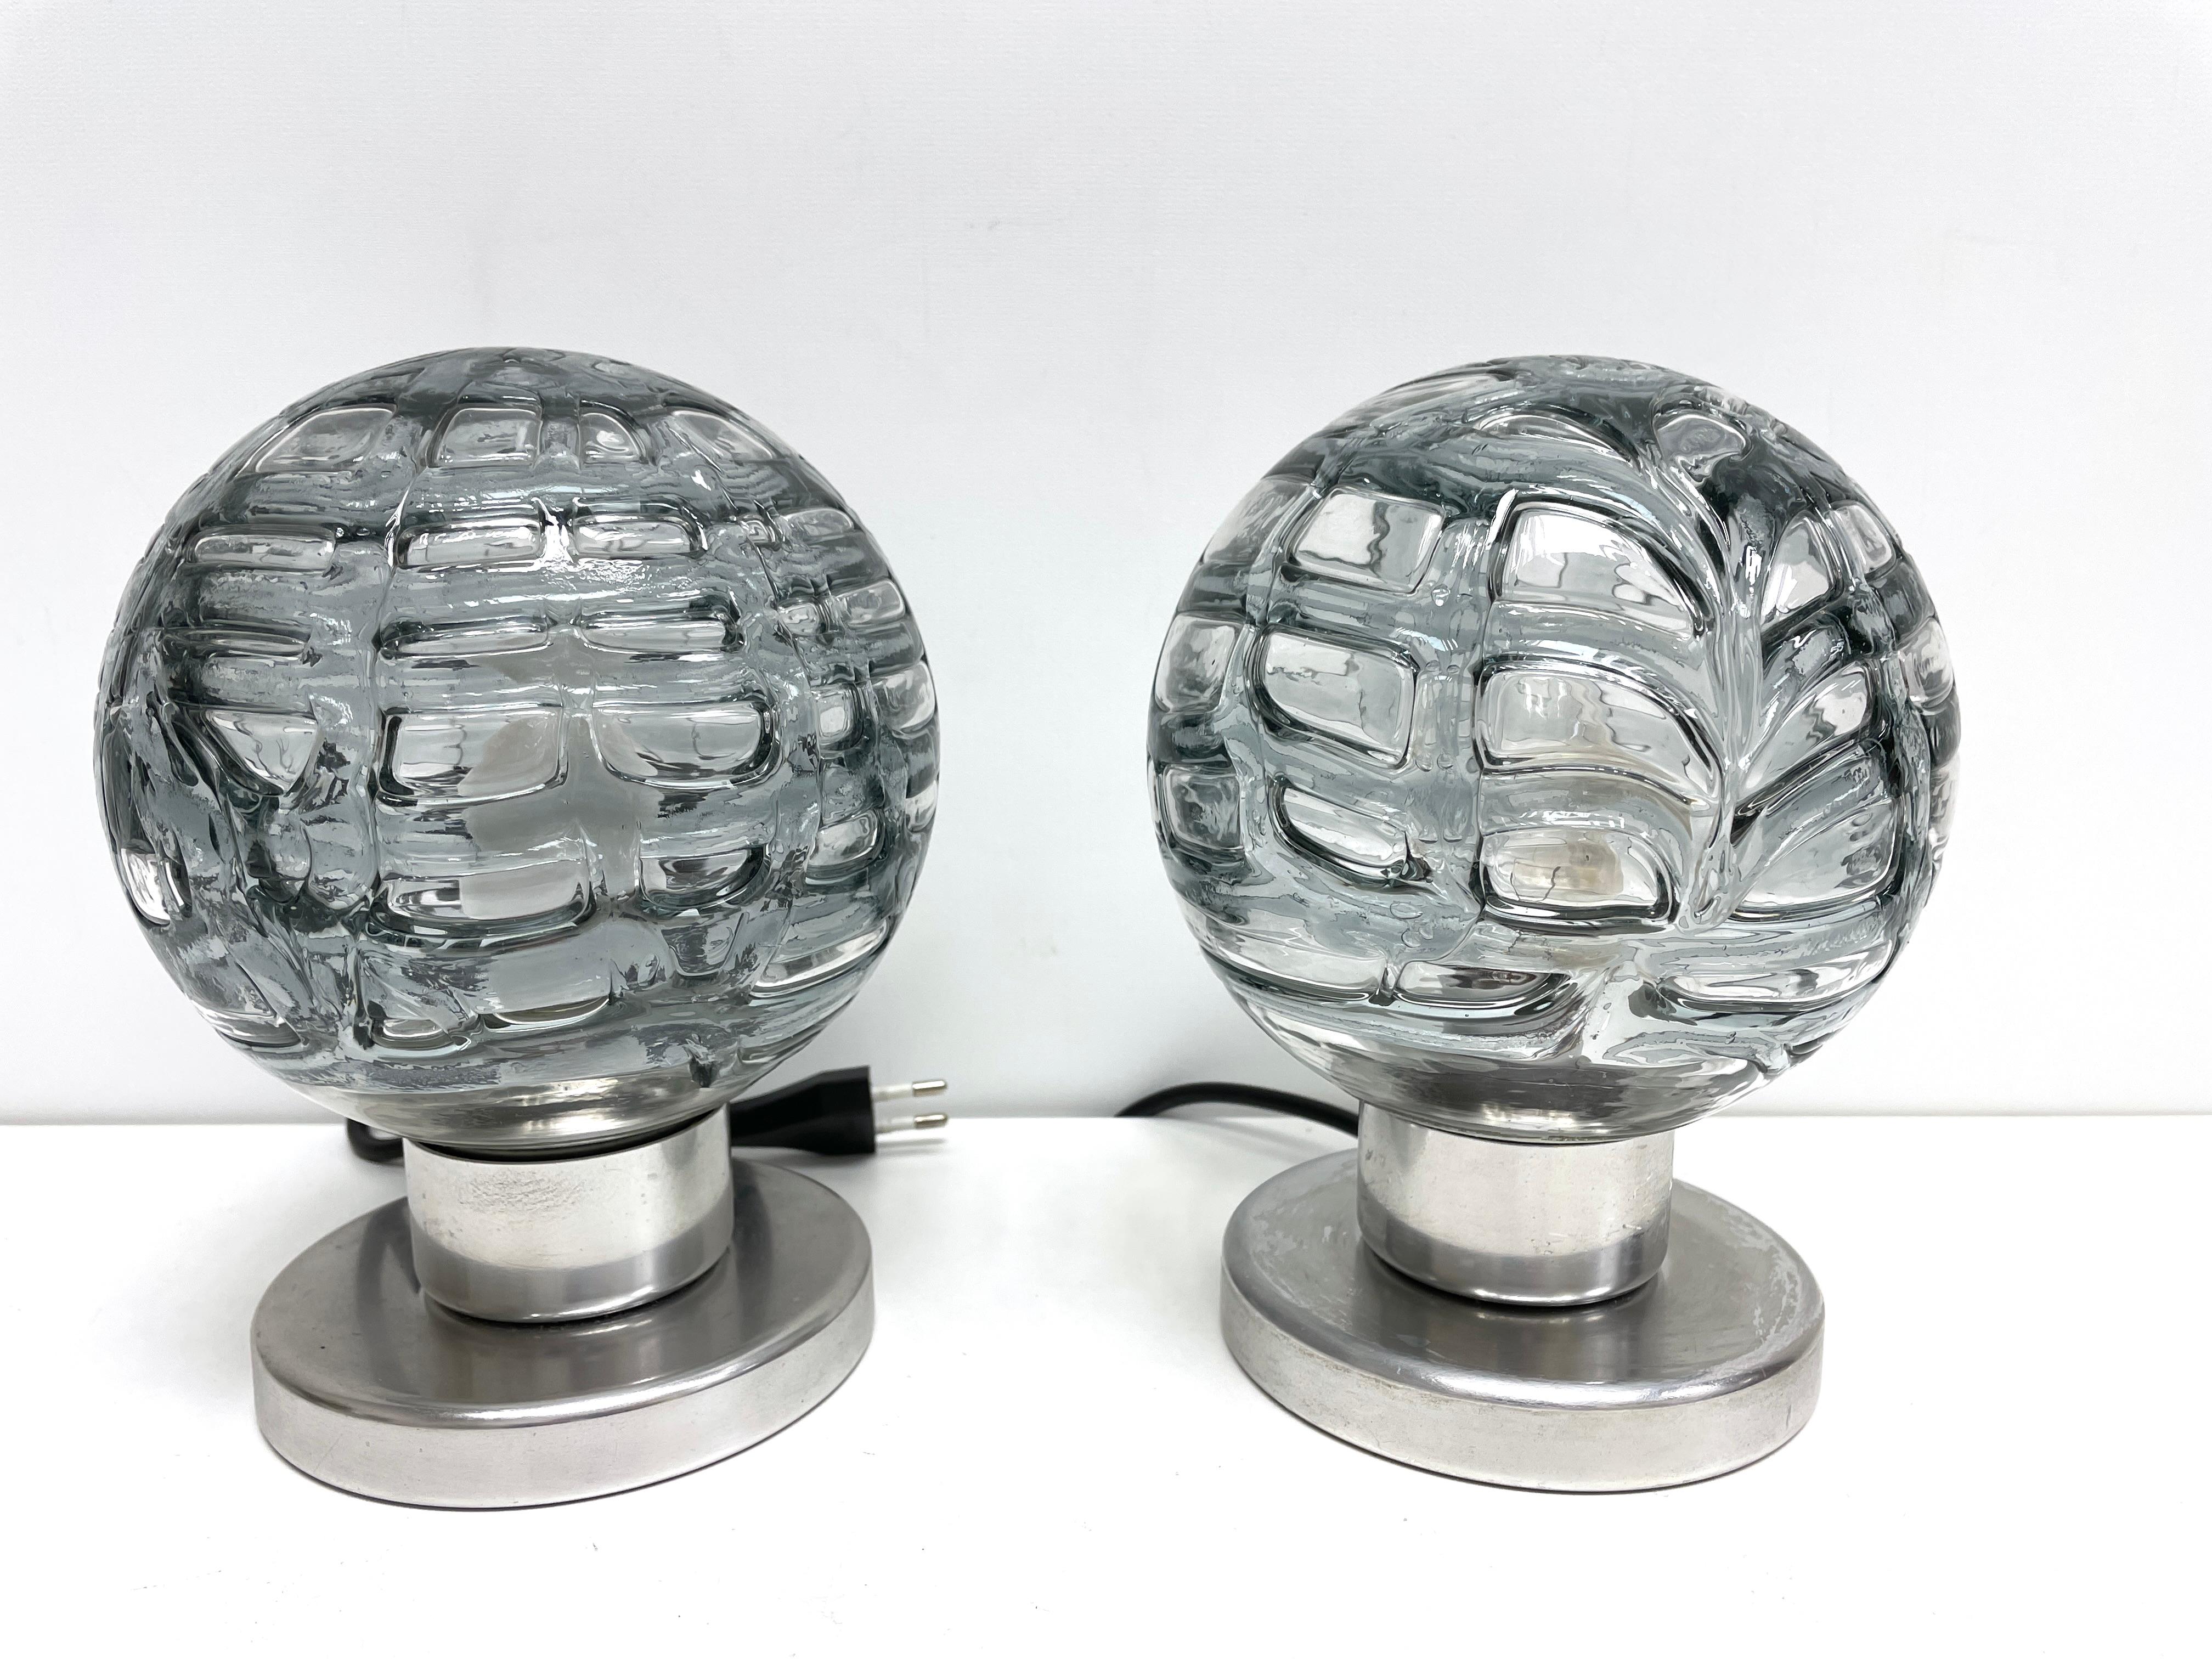 Petite pair of midcentury Doria table lamps. Glass with grey smoked color. Base made of Aluminum. Each one requires one European E14 / 110 Volt Torpedo bulb, up to 60 watts each. We can also fit them with a white US plug so they would work with an